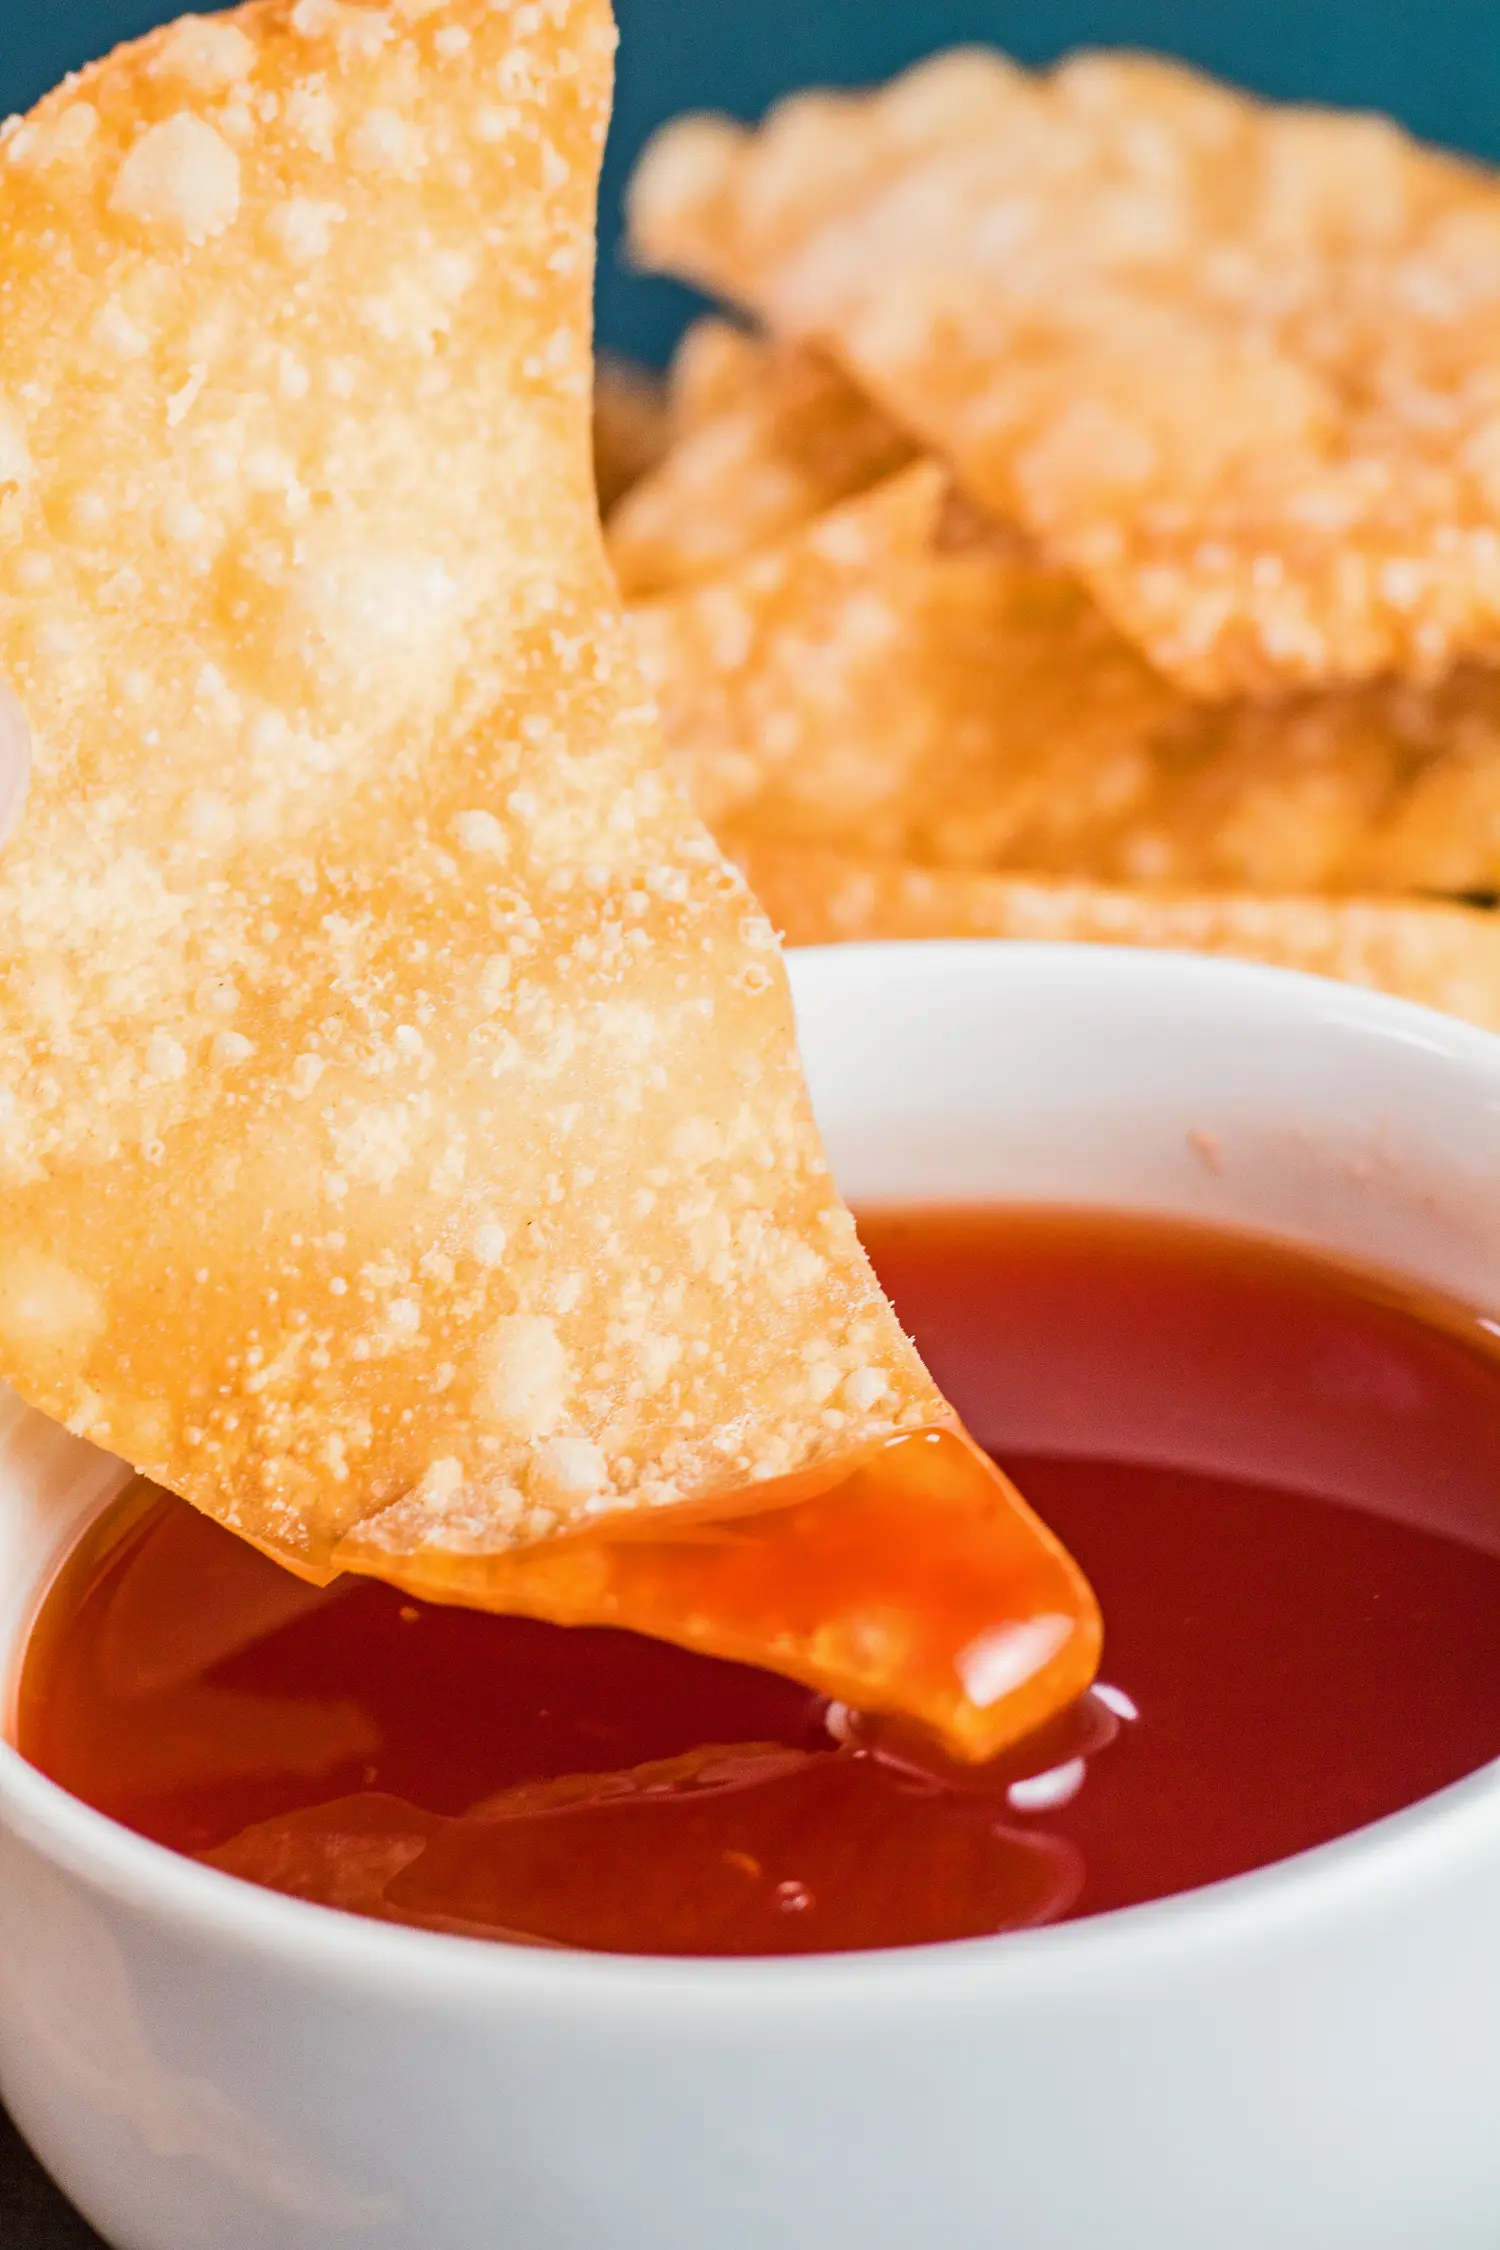 tall closeup of a fried wonton being dipped into the bowl of sweet and sour sauce.